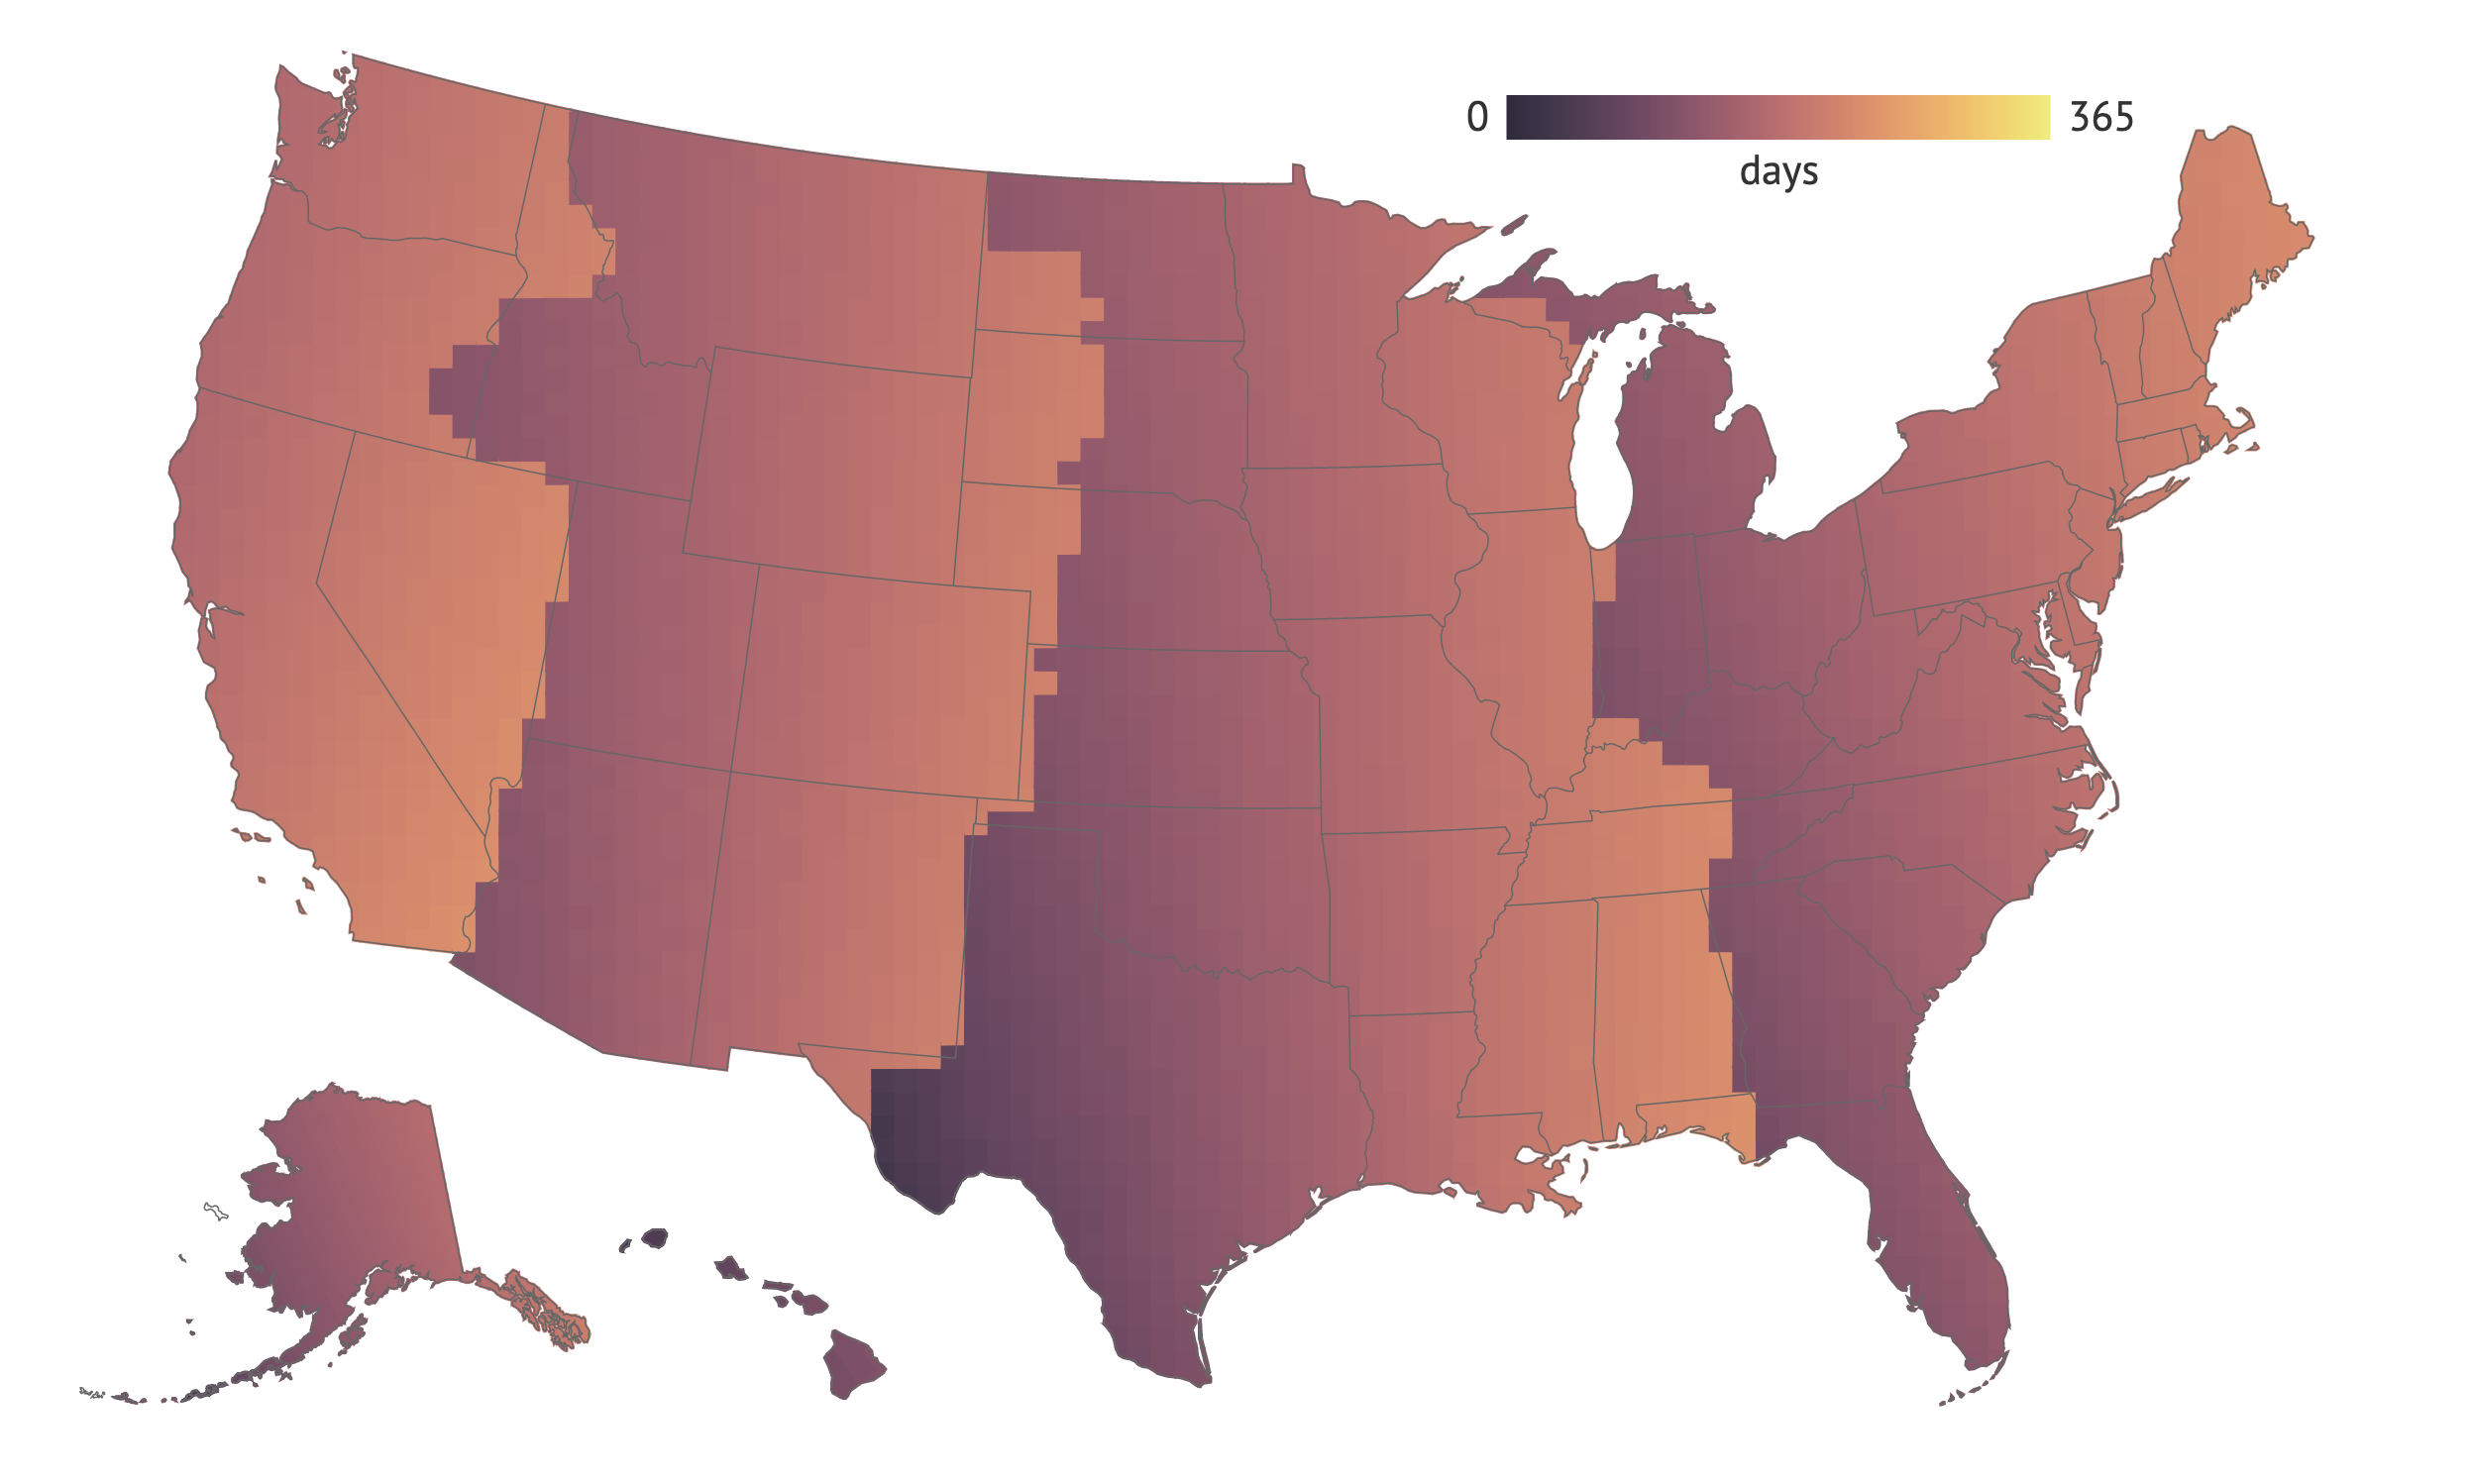 Daylight Saving Time: Maps Show Why We Disagree About 'Spring Forward' -  Bloomberg